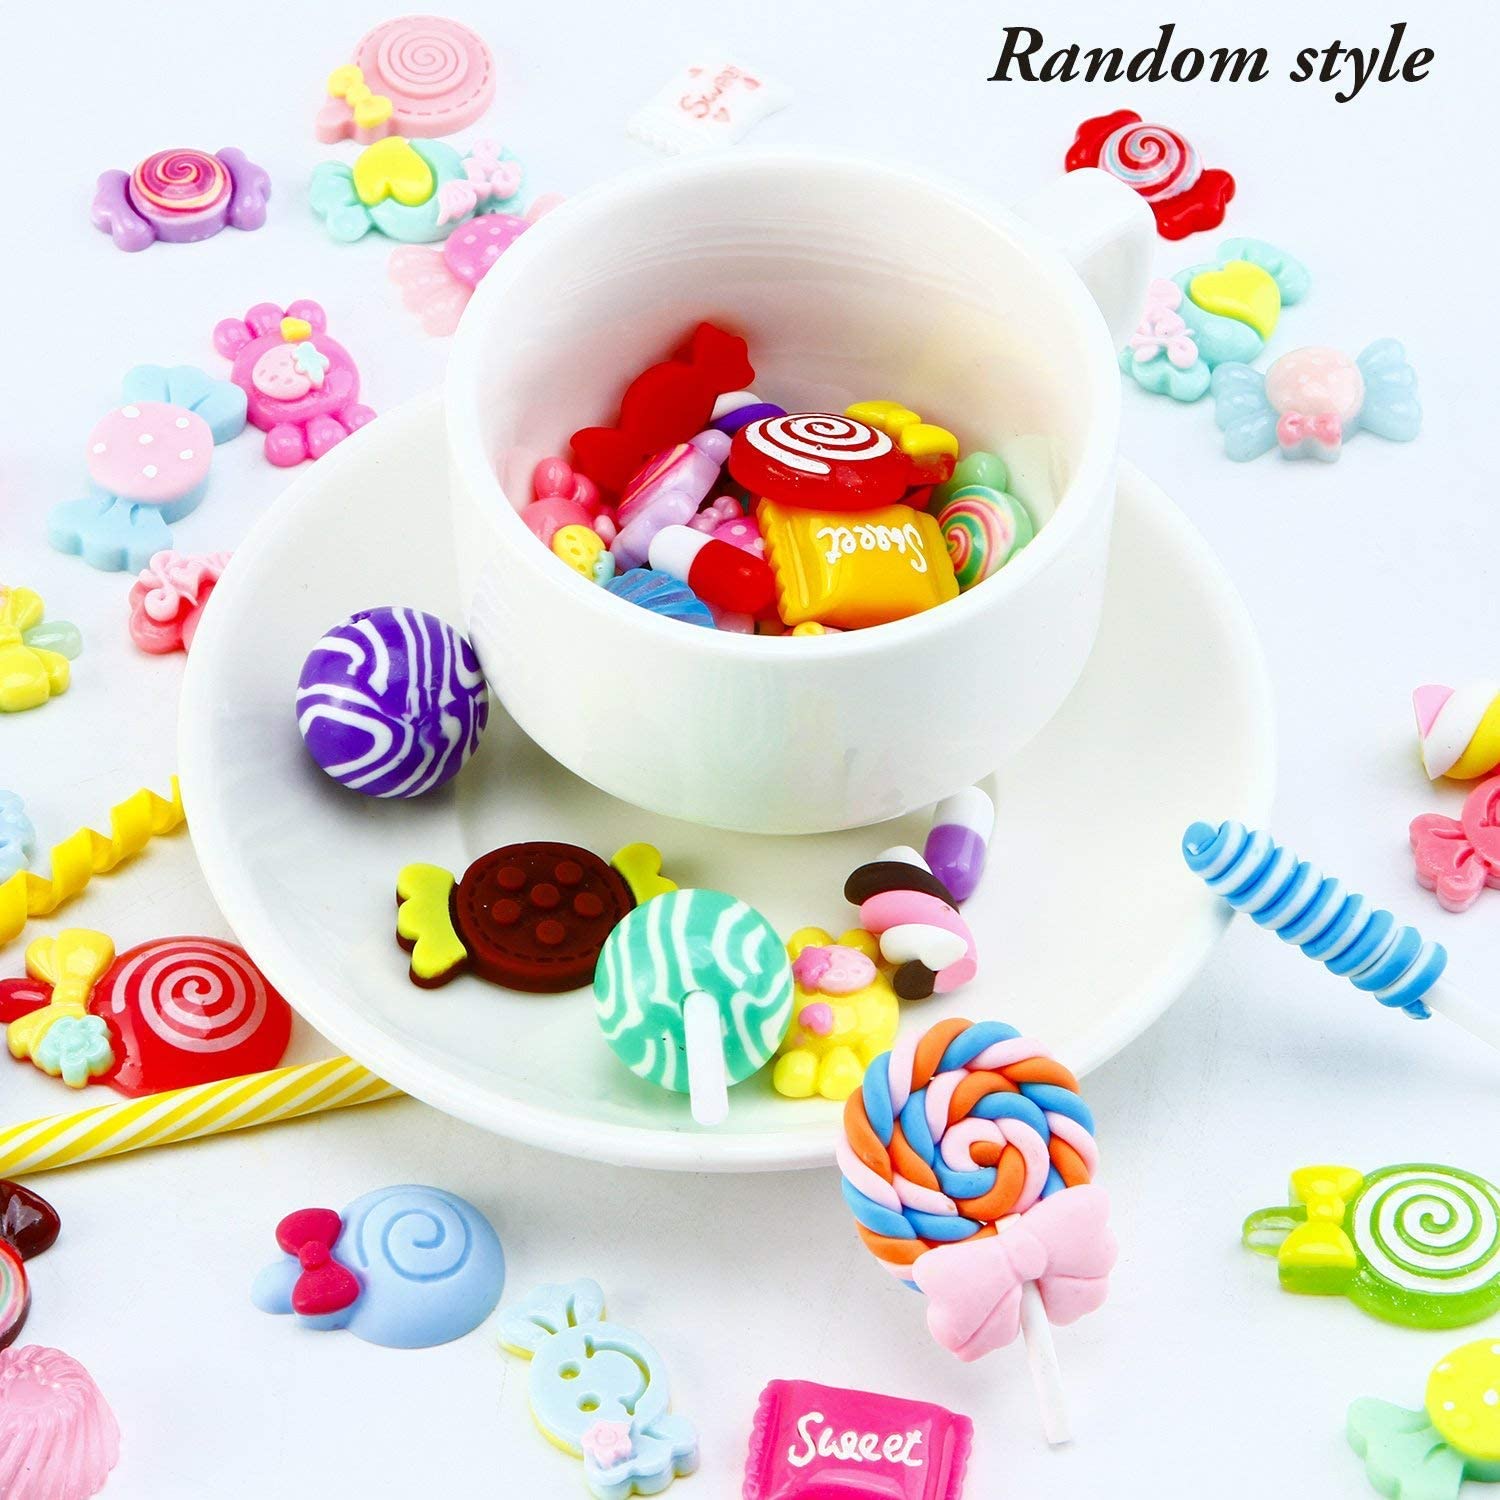 LNGOOR Resin Flatback Charms, 60pcs Slime Charms and Containers Mixed Candy Cake Sweets Resin Cabochons for DIY Crafts, Scrapbooking, Jewelry Making Mixed Resin Flatback Slime Beads Making Supplies - image 5 of 8